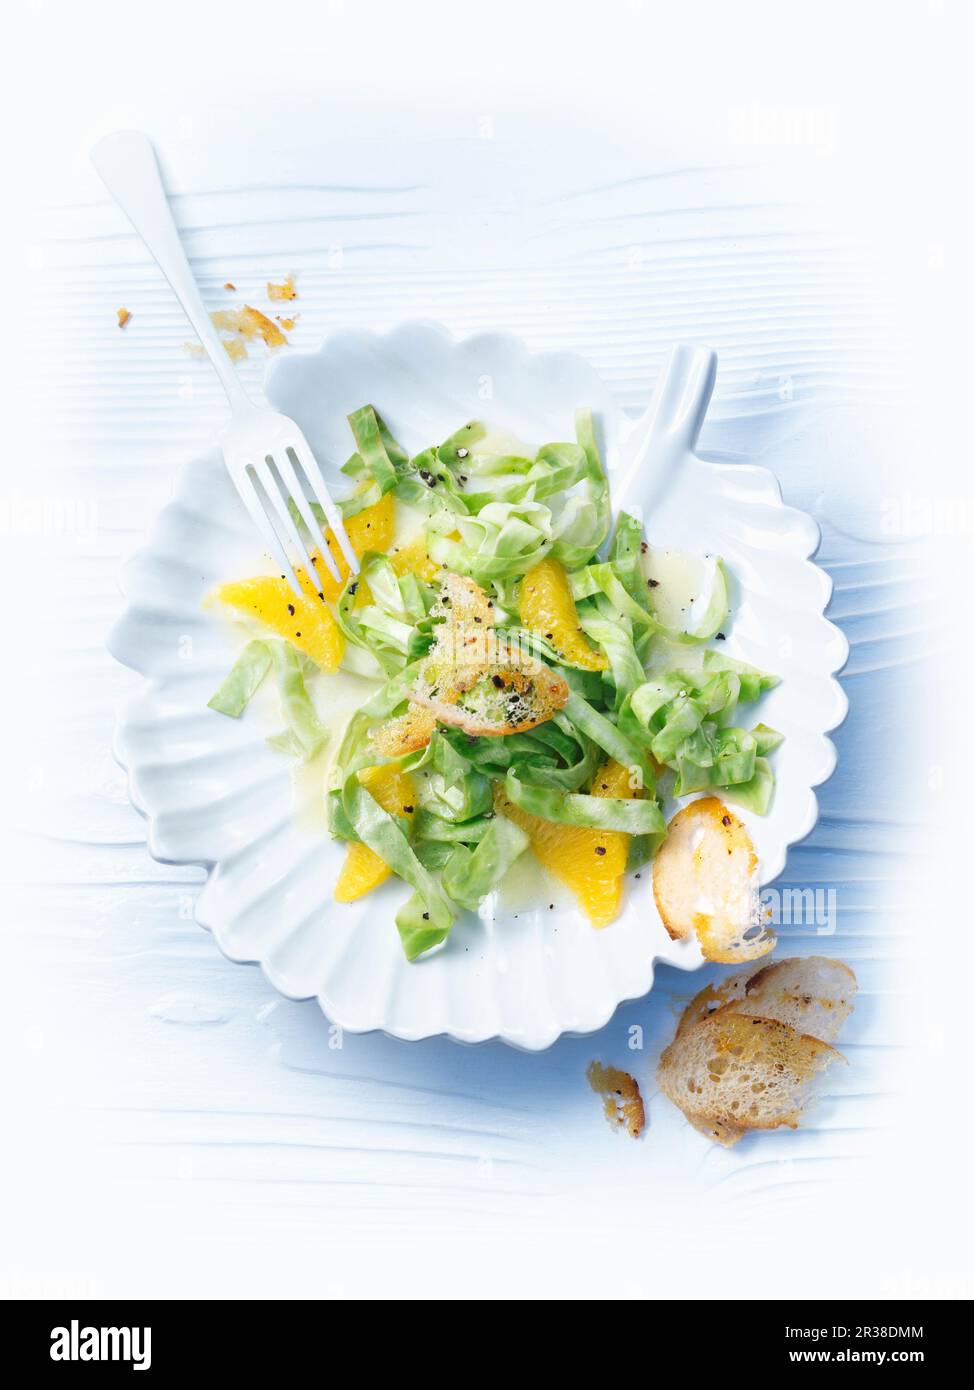 Pointed cabbage salad with orange dressing Stock Photo